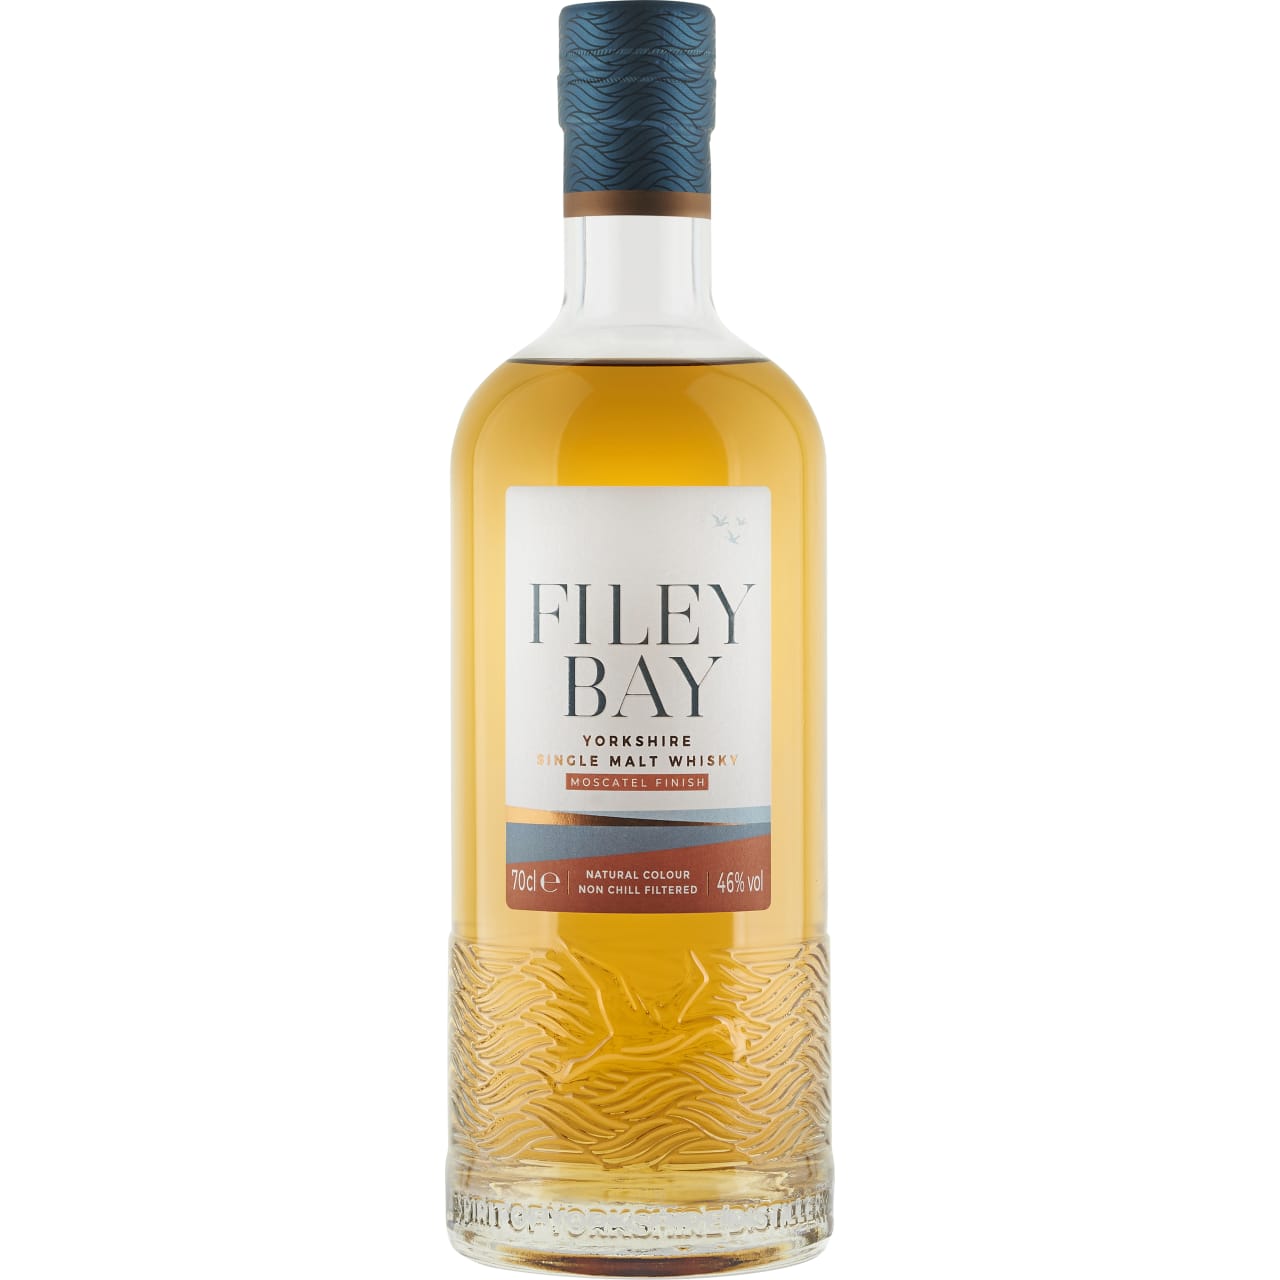 This field to bottle single malt was initially matured in 200L bourbon casks (filled in 2016), before being transferred to 250L Hogshead barrels from Spain that had held Moscatel for 10 years prior to this. The use of bourbon casks followed by Moscatel barrels to finish creates a really interesting flavourful whisky. Still light and soft like our previous releases but with an added depth, more layers of fruit and sweet spices.